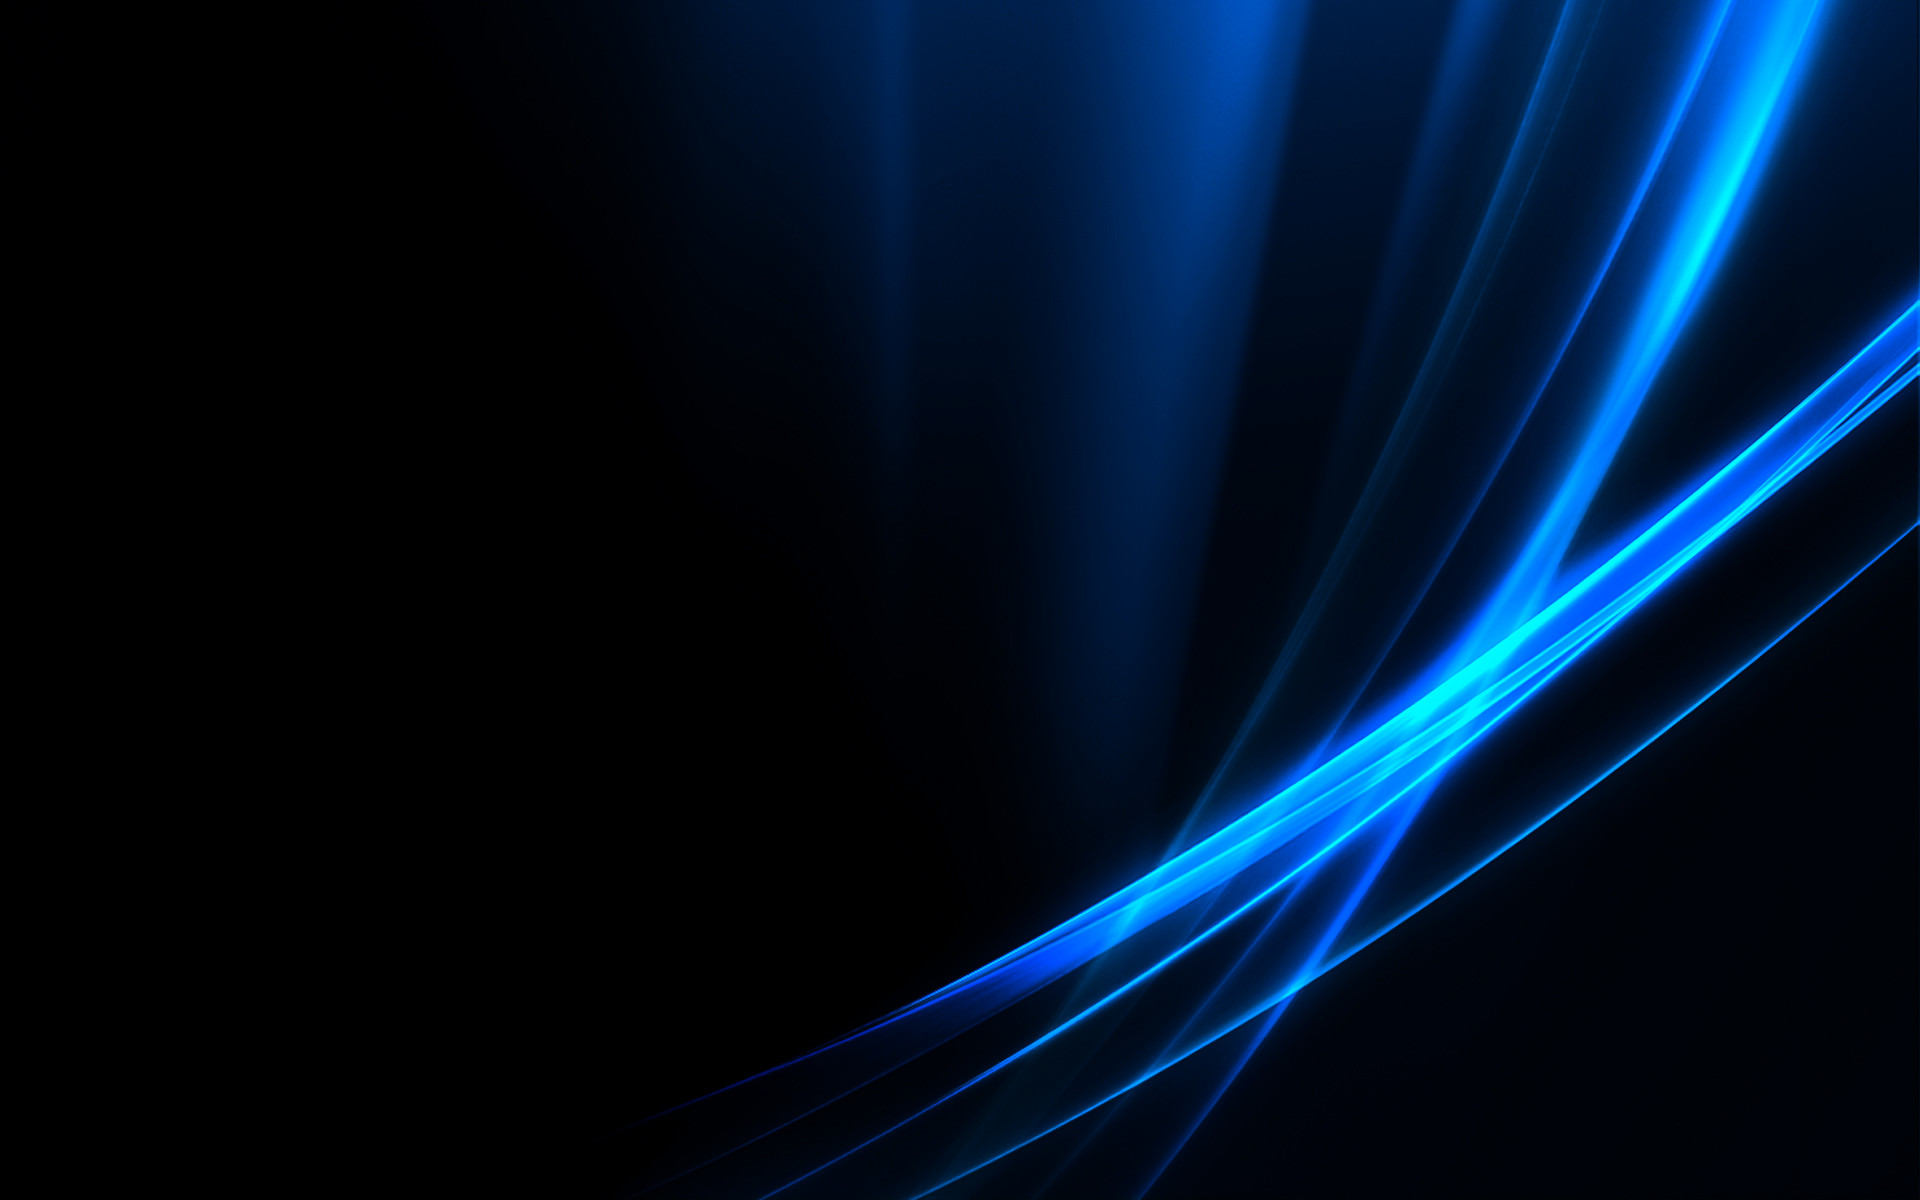 1920 x 1200 Wallpapers, Widescreen Wallpapers, 12277-abstract-blue.jpg